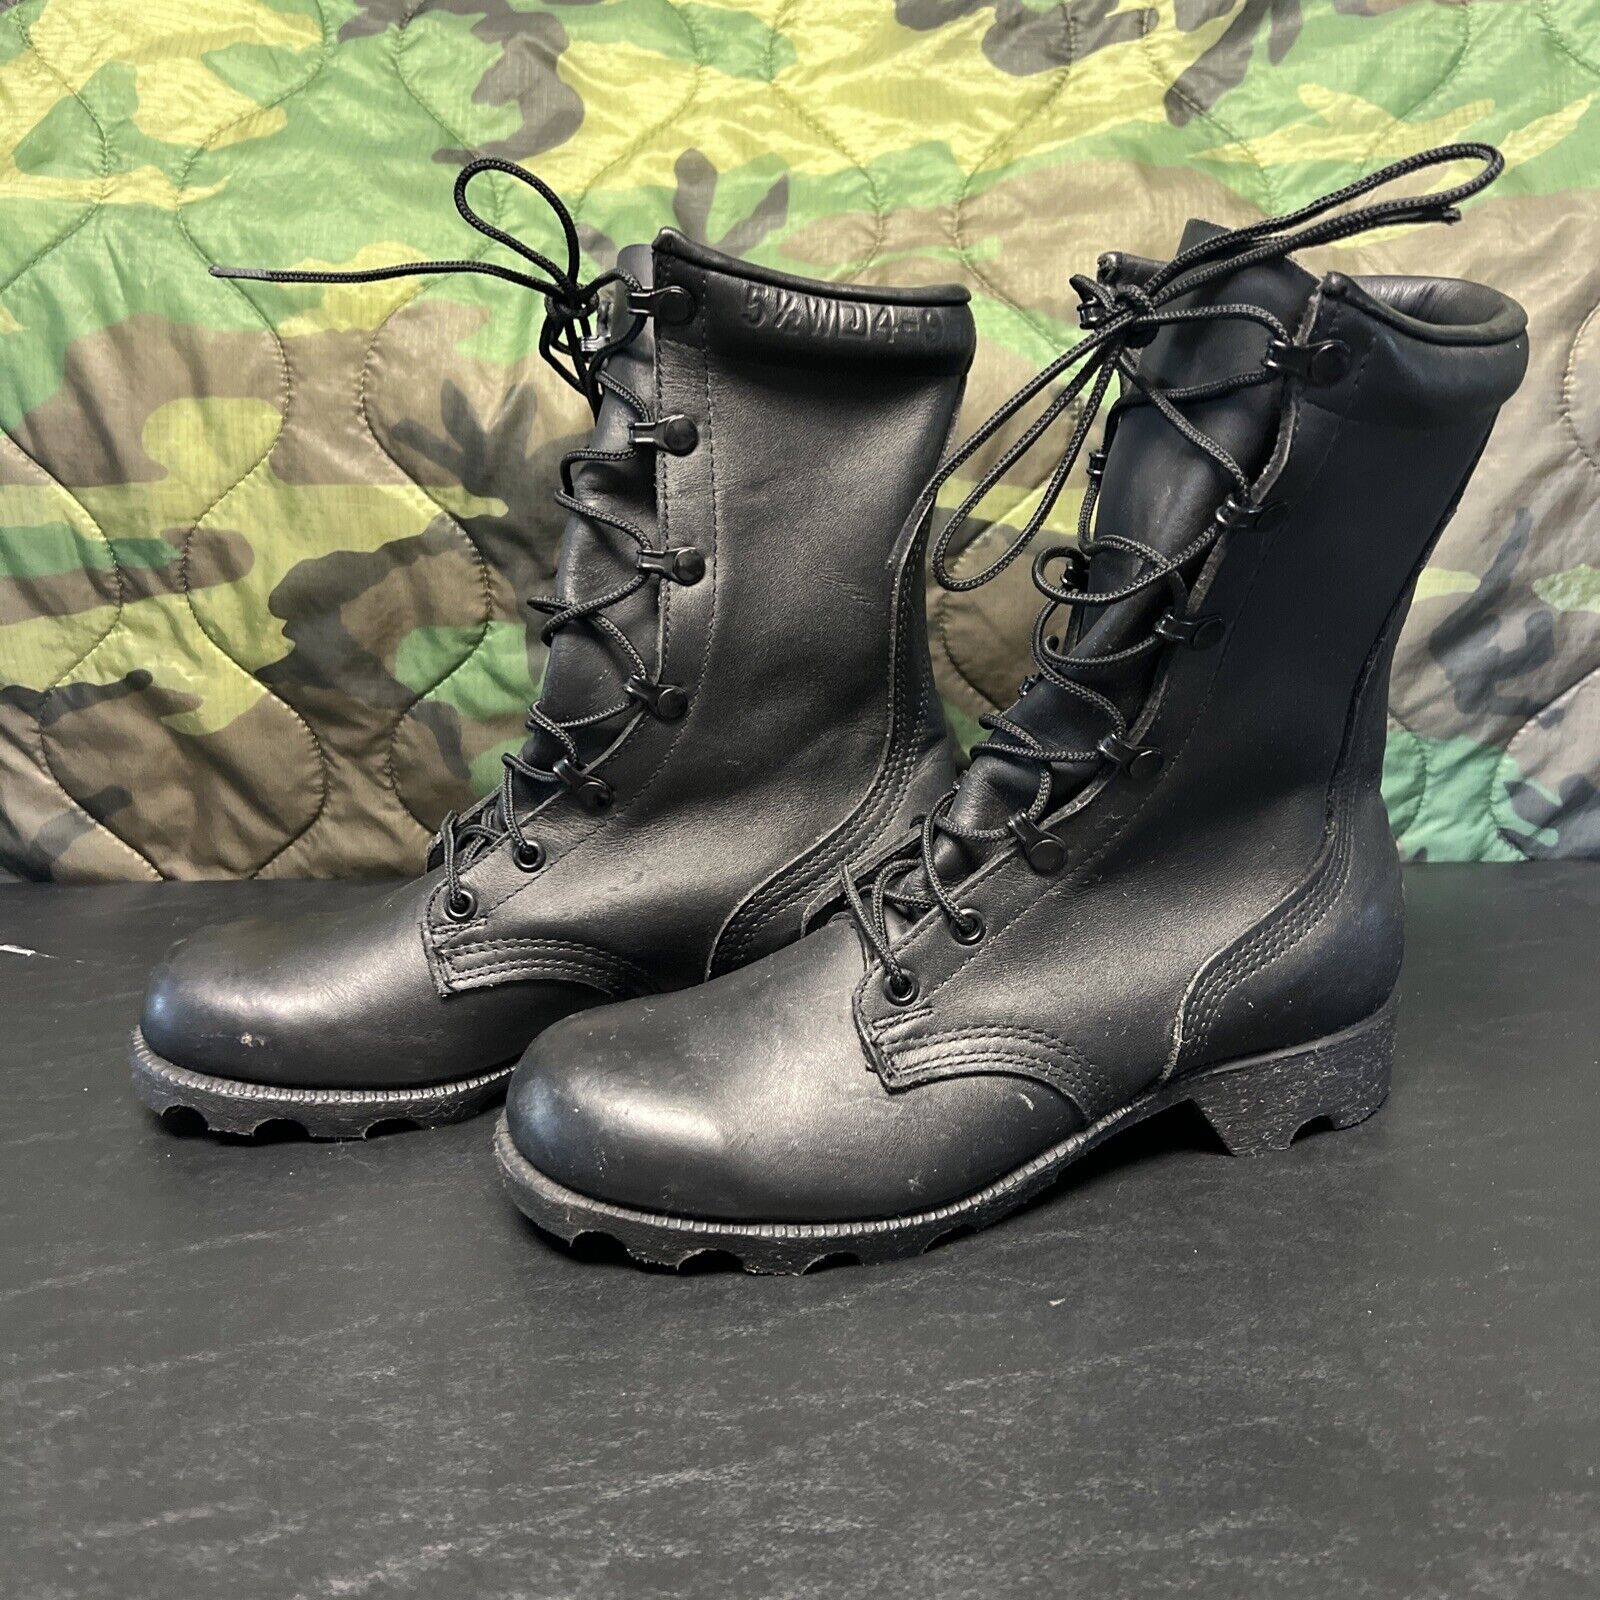 Vtg RO-SEARCH Men’s Size 5.5 W Military Black Leather Combat Jungle Boots USA A1